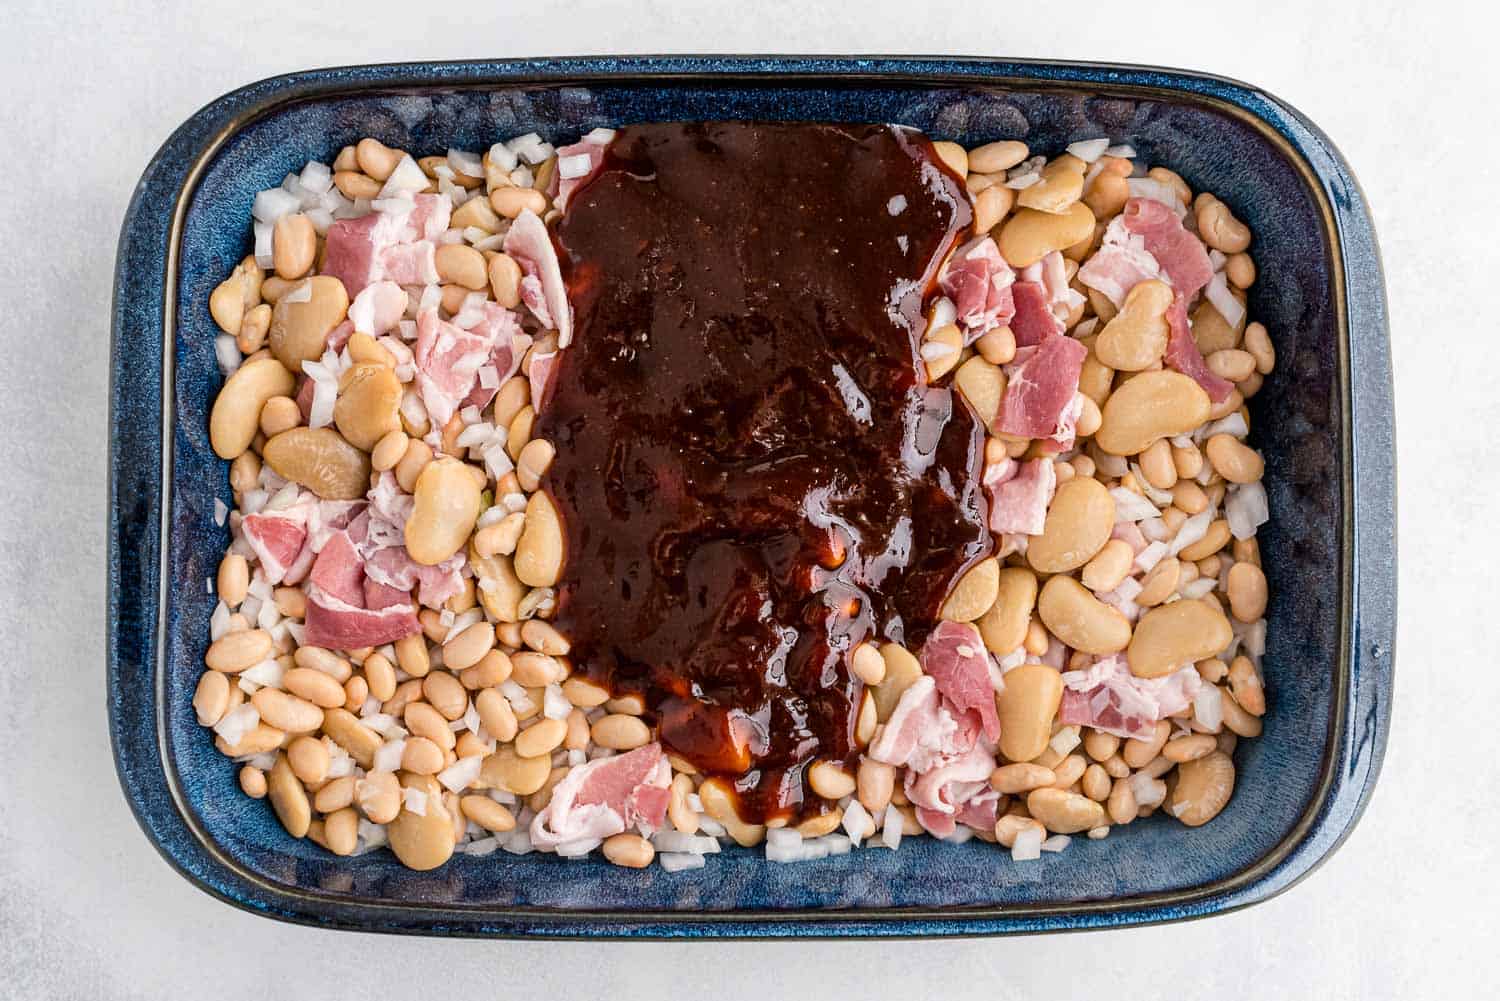 Sauce poured over beans.